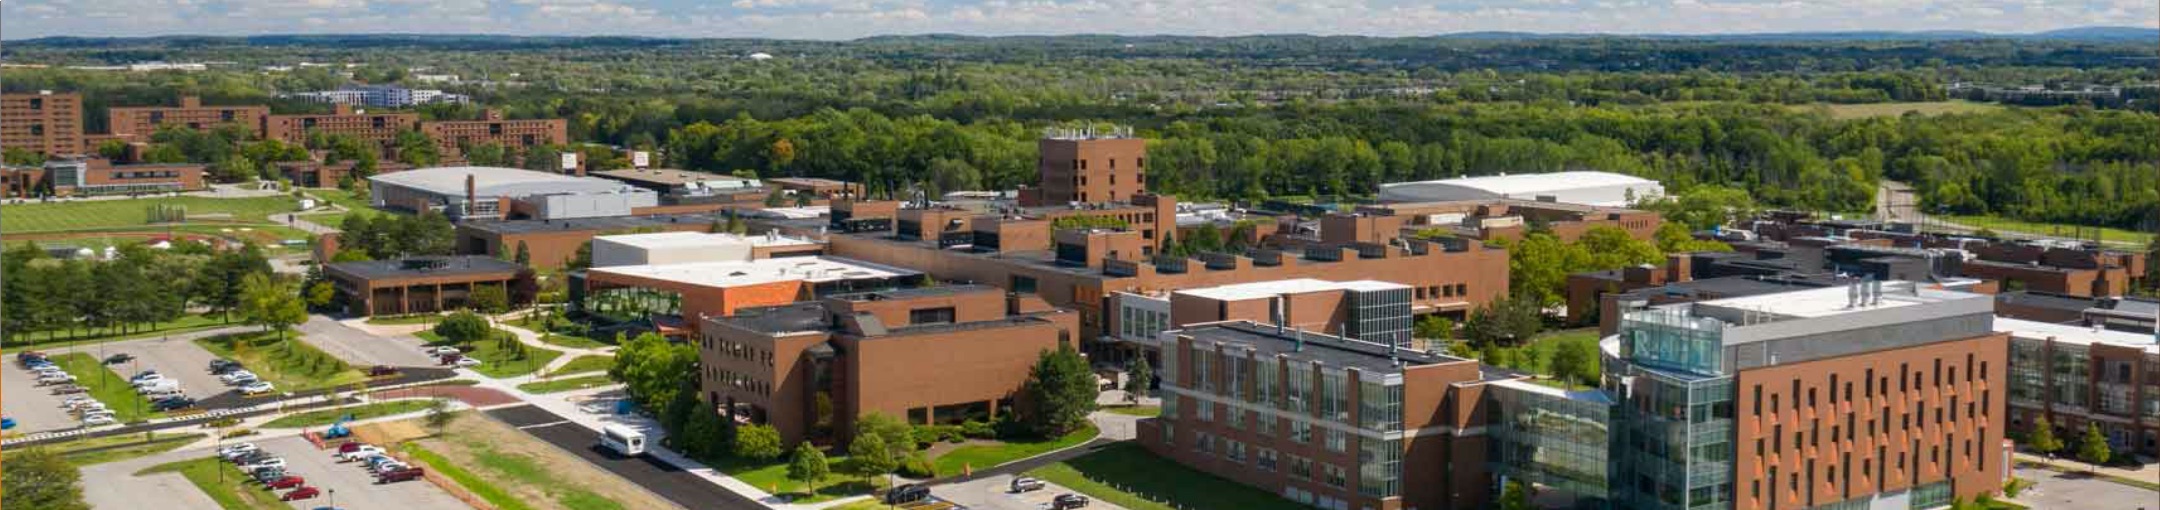 Overhead shot of the RIT campus